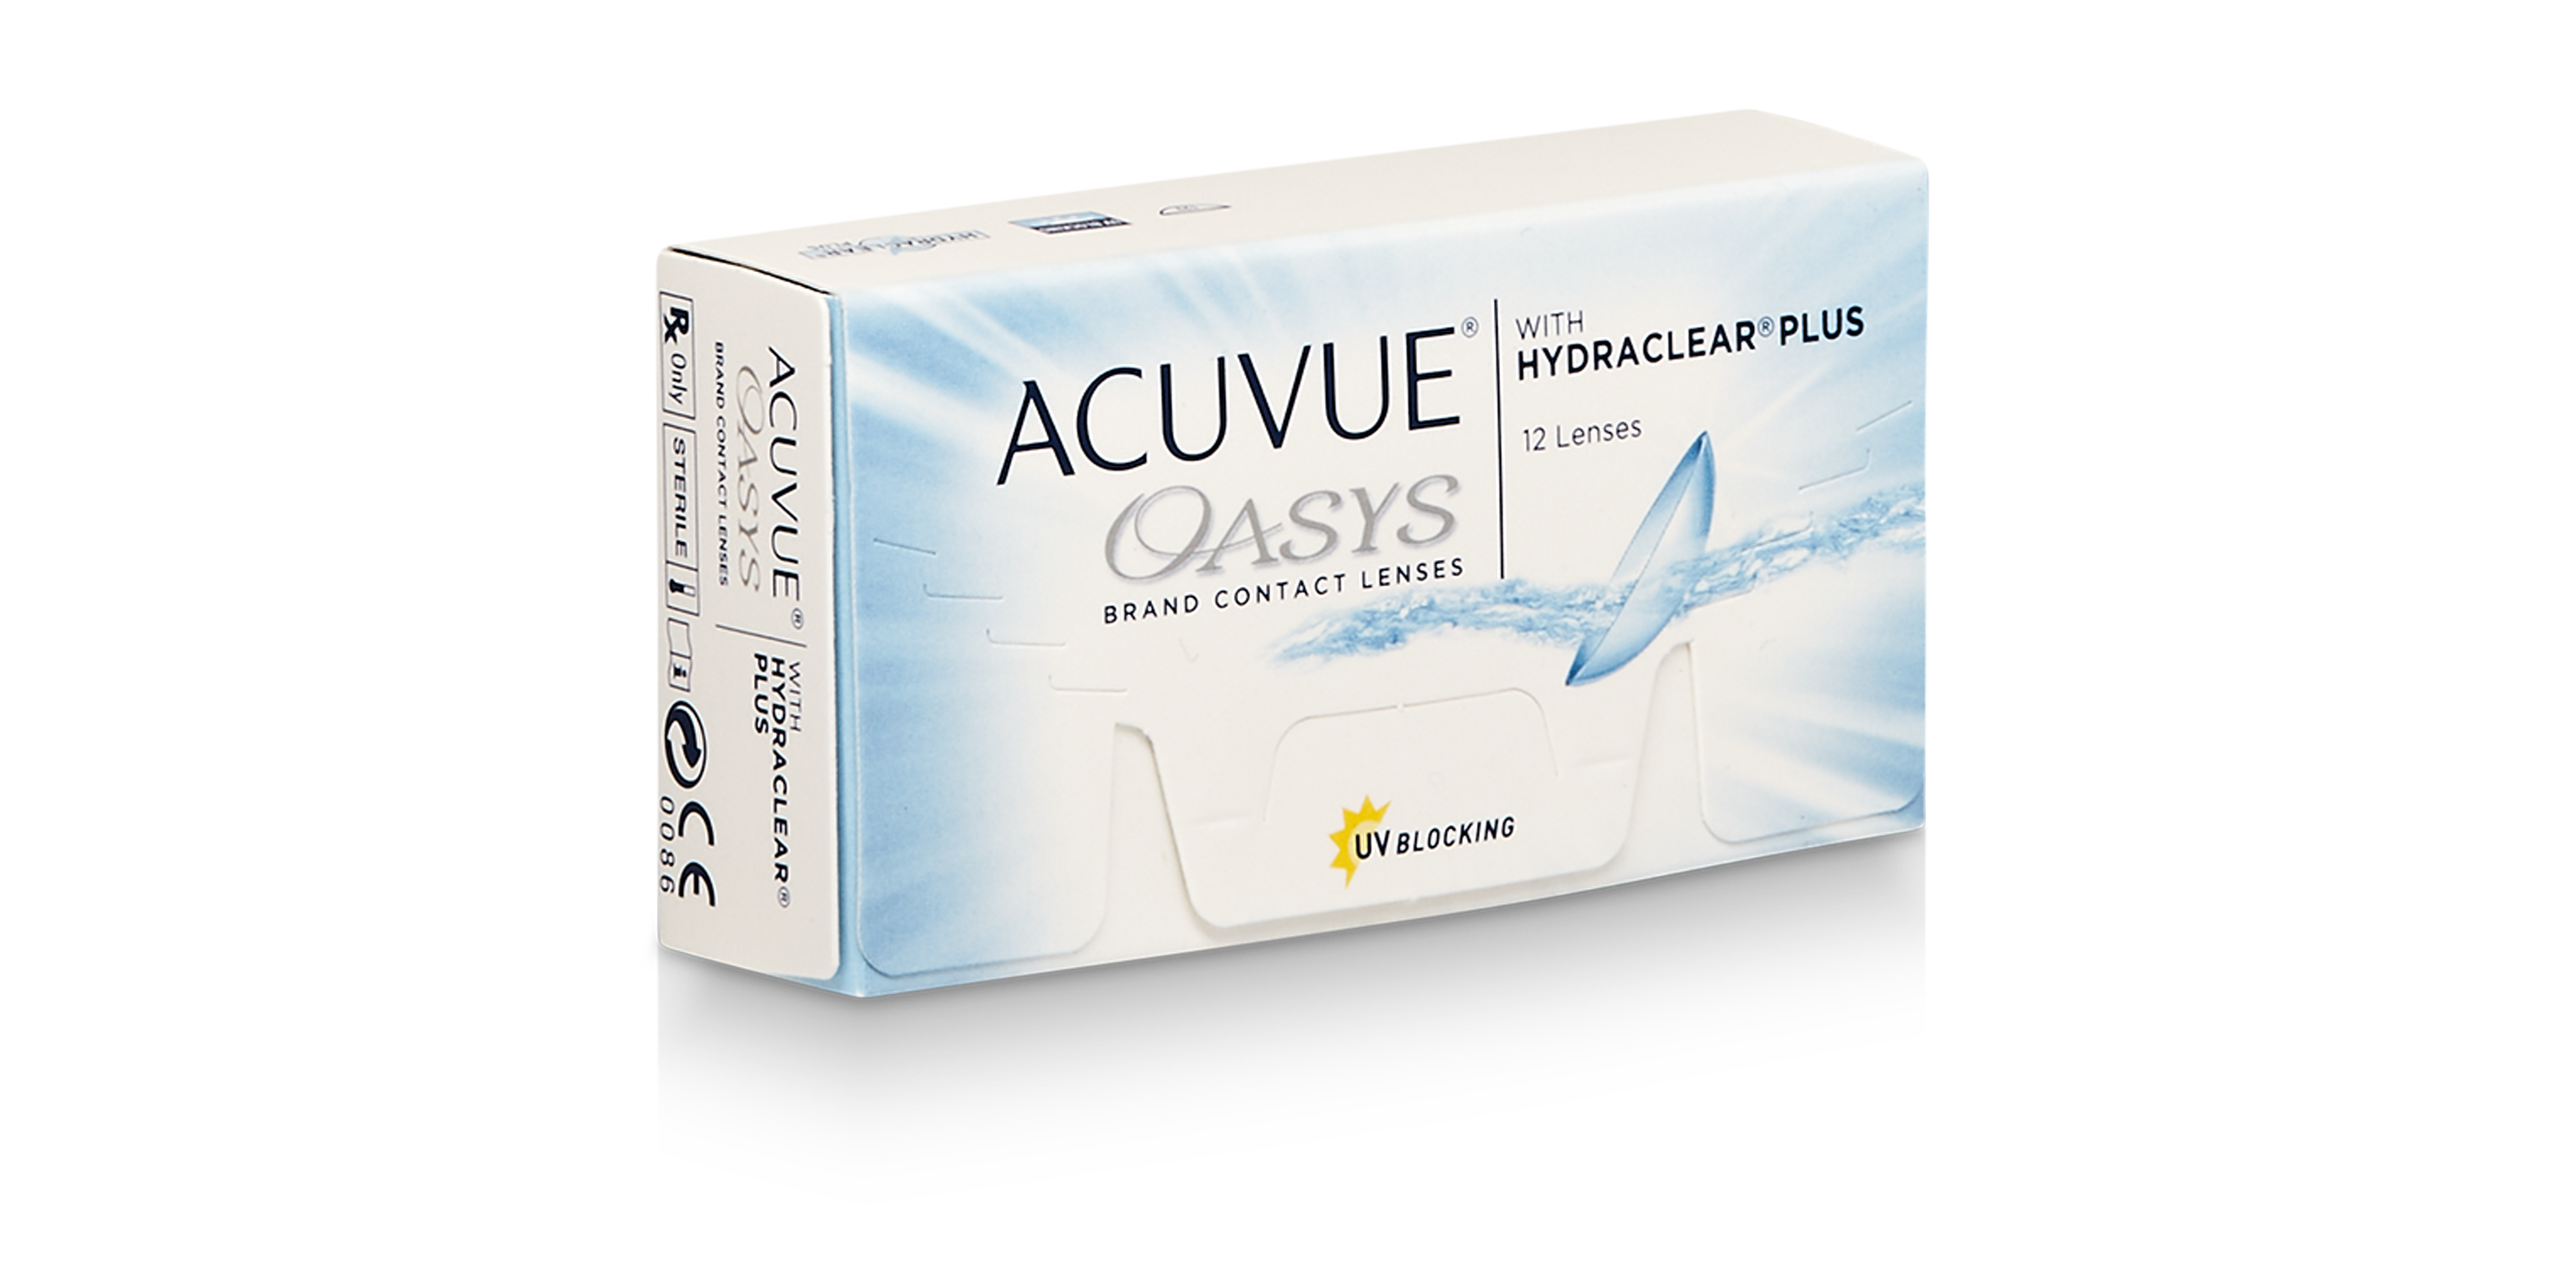 Acuvue Oasys with Hydraclear Plus. Acuvue Oasys with Hydraclear Plus Senofilcon a. Acuvue Oasys with Hydraclear Plus Senofilcon a 2023. Acuvue Oasys with Hydraclear Plus 24. Acuvue oasys недельные